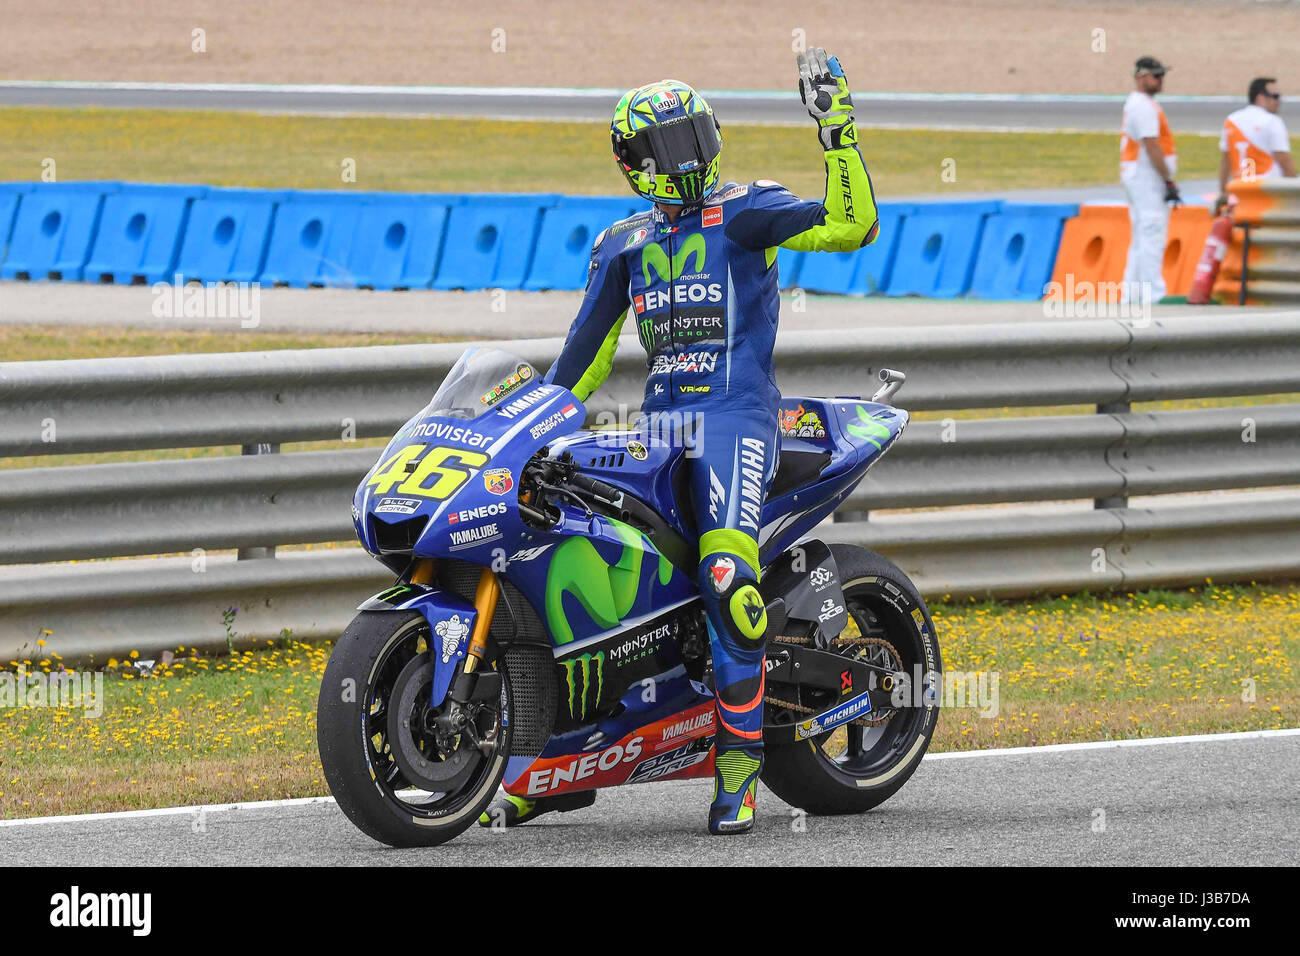 Jerez de la Frontera, Spain. 5th May, 2017. Valentino Rossi of Italy and  Movistar Yamaha MotoGP greats the fans during free practice for the MotoGP  of Spain at Circuito de Jerez on